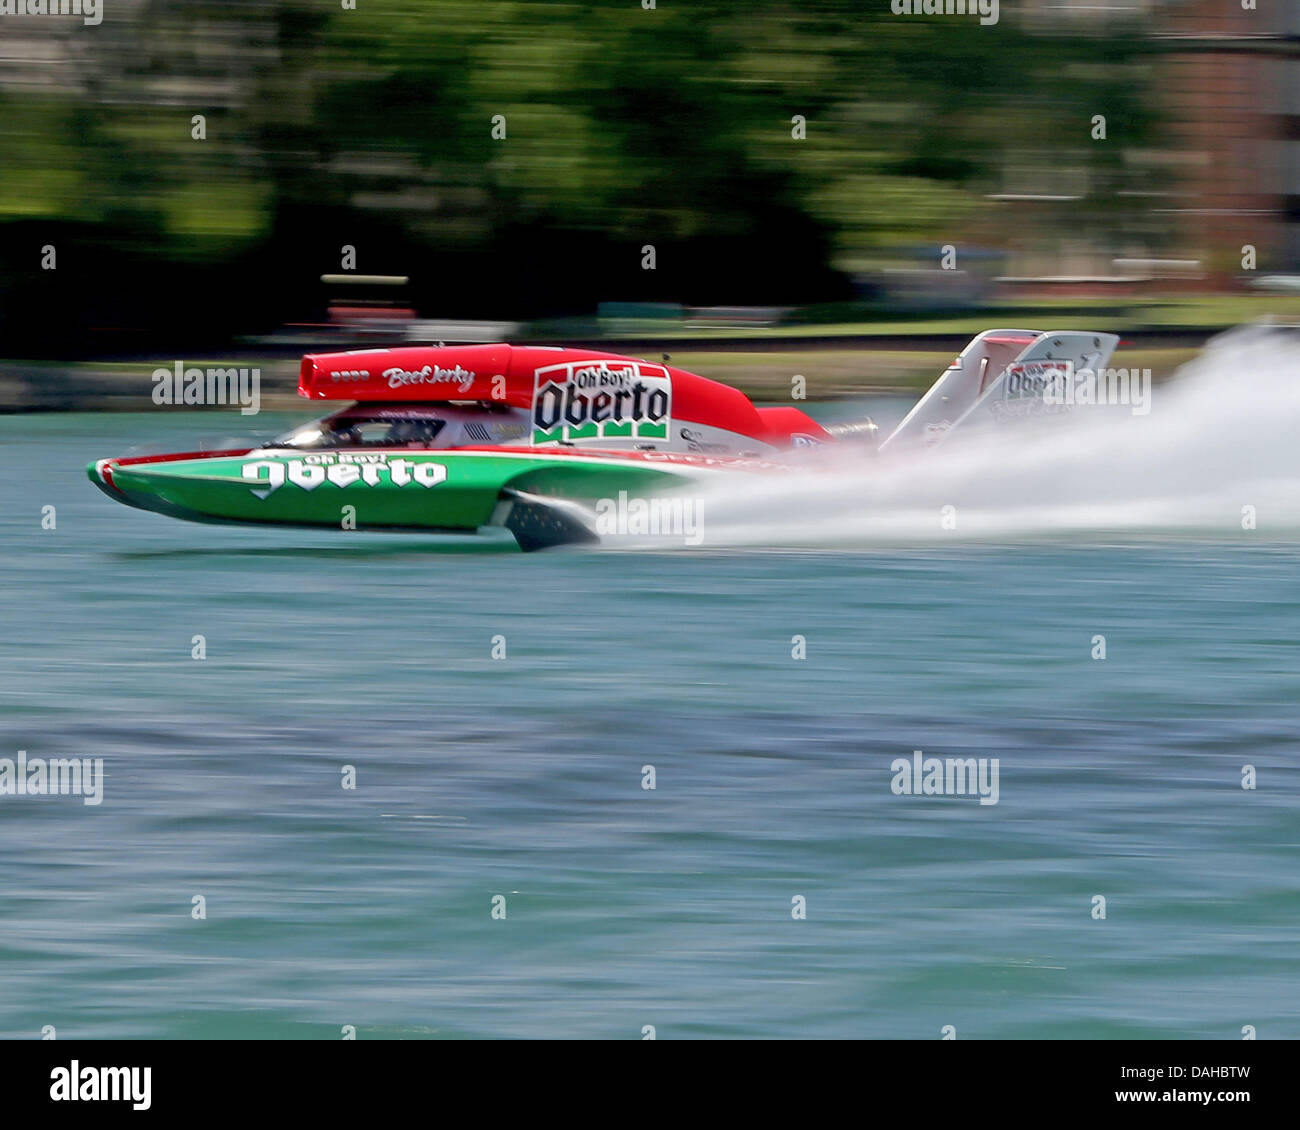 Detroit, MI, USA. 13th July, 2013. Steve David (1) pilots his Oh Boy! Oberto boat past the Detroit shoreline during heat 1a on the Detroit River on July 13, 2013 in Detroit, Michigan. Tom Turrill/CSM/Alamy Live News Stock Photo